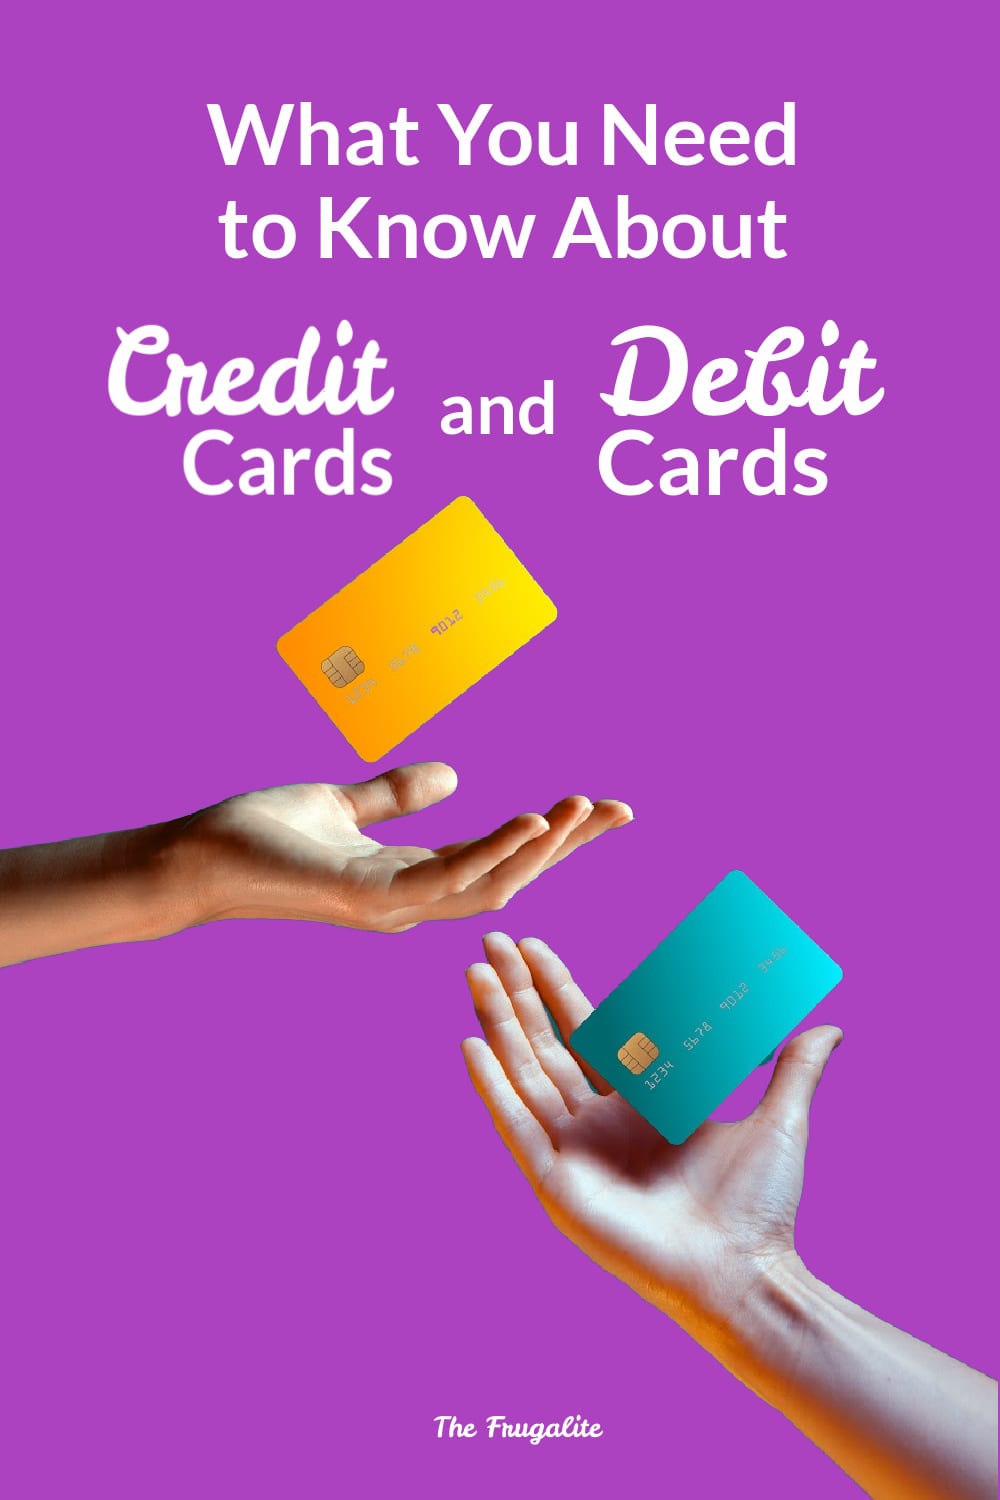 What You Need to Know About Credit Cards and Debit Cards